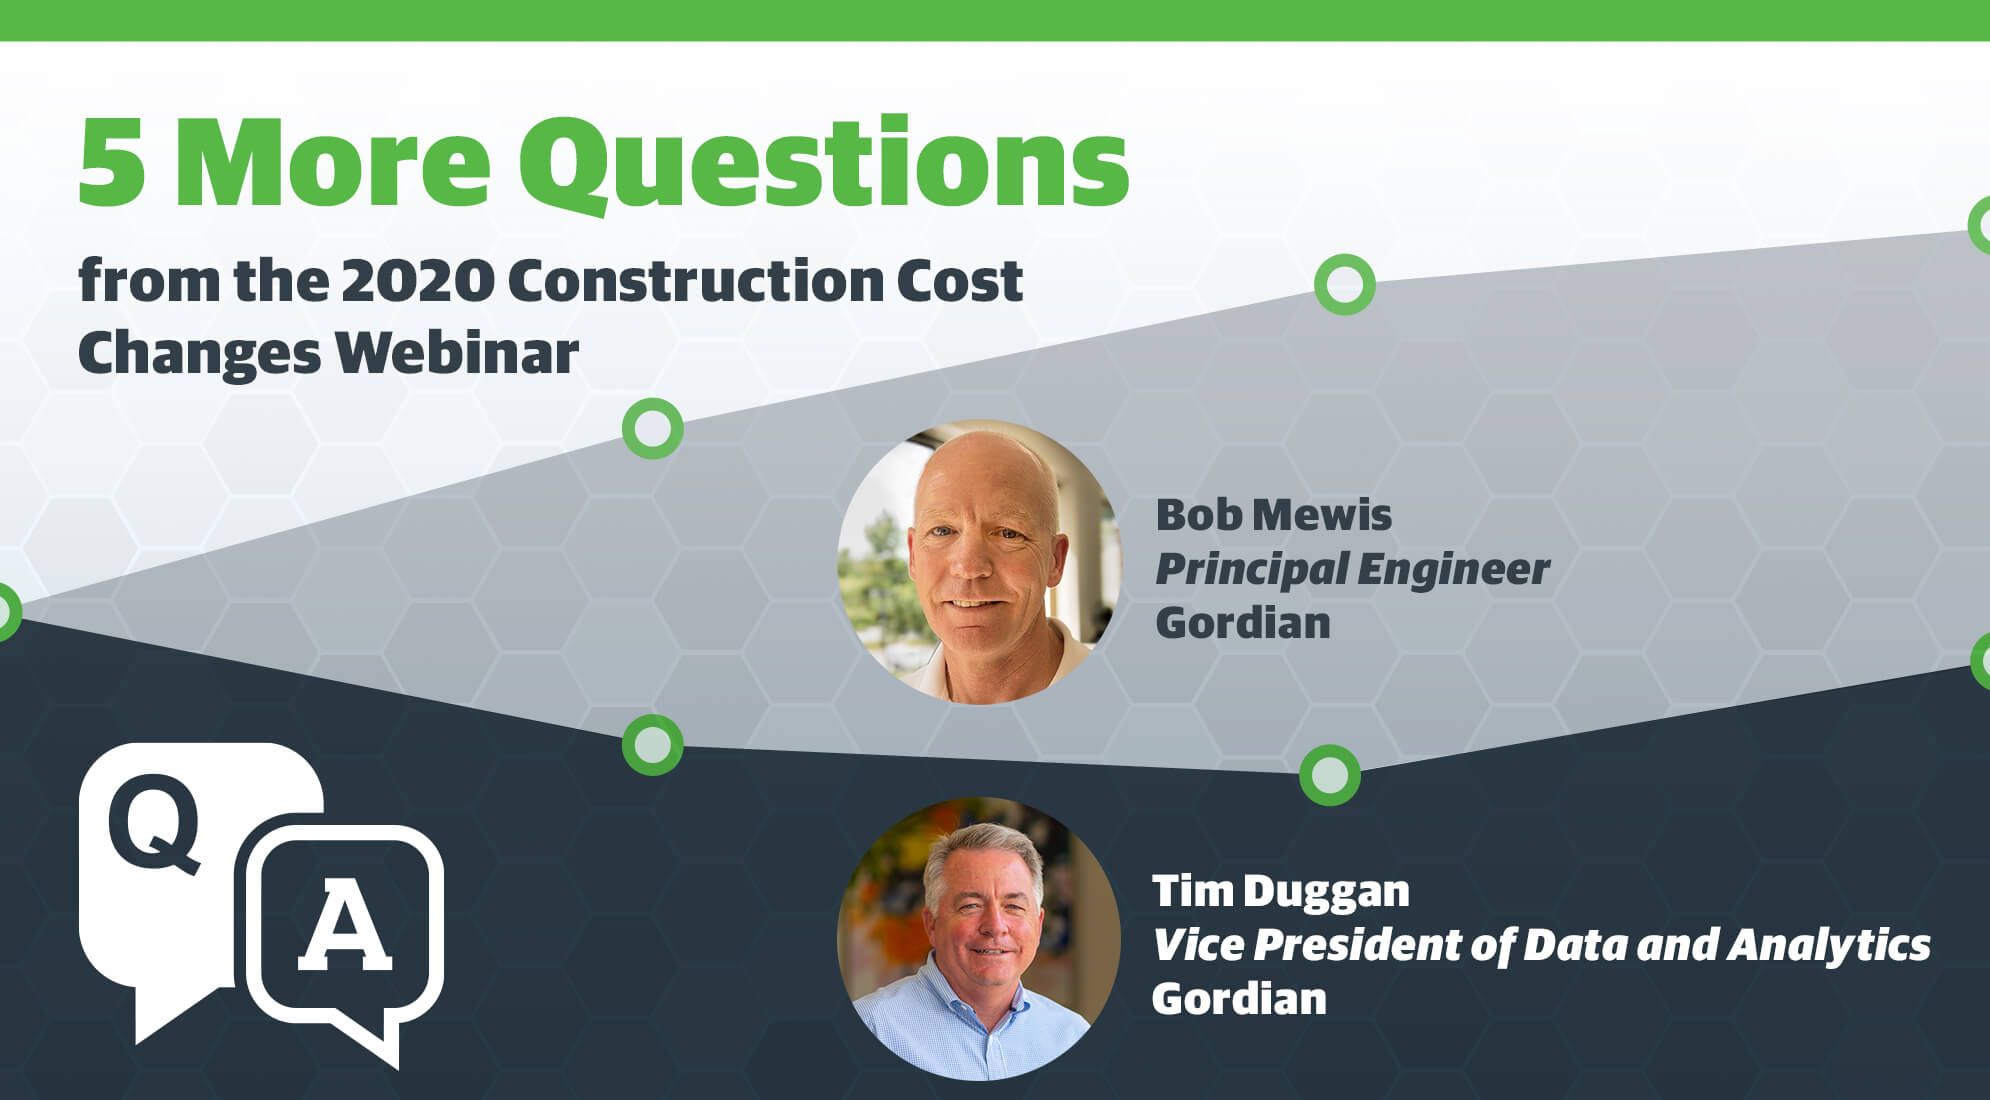 5 More Popular Questions from the 2020 Construction Cost Changes Webinar